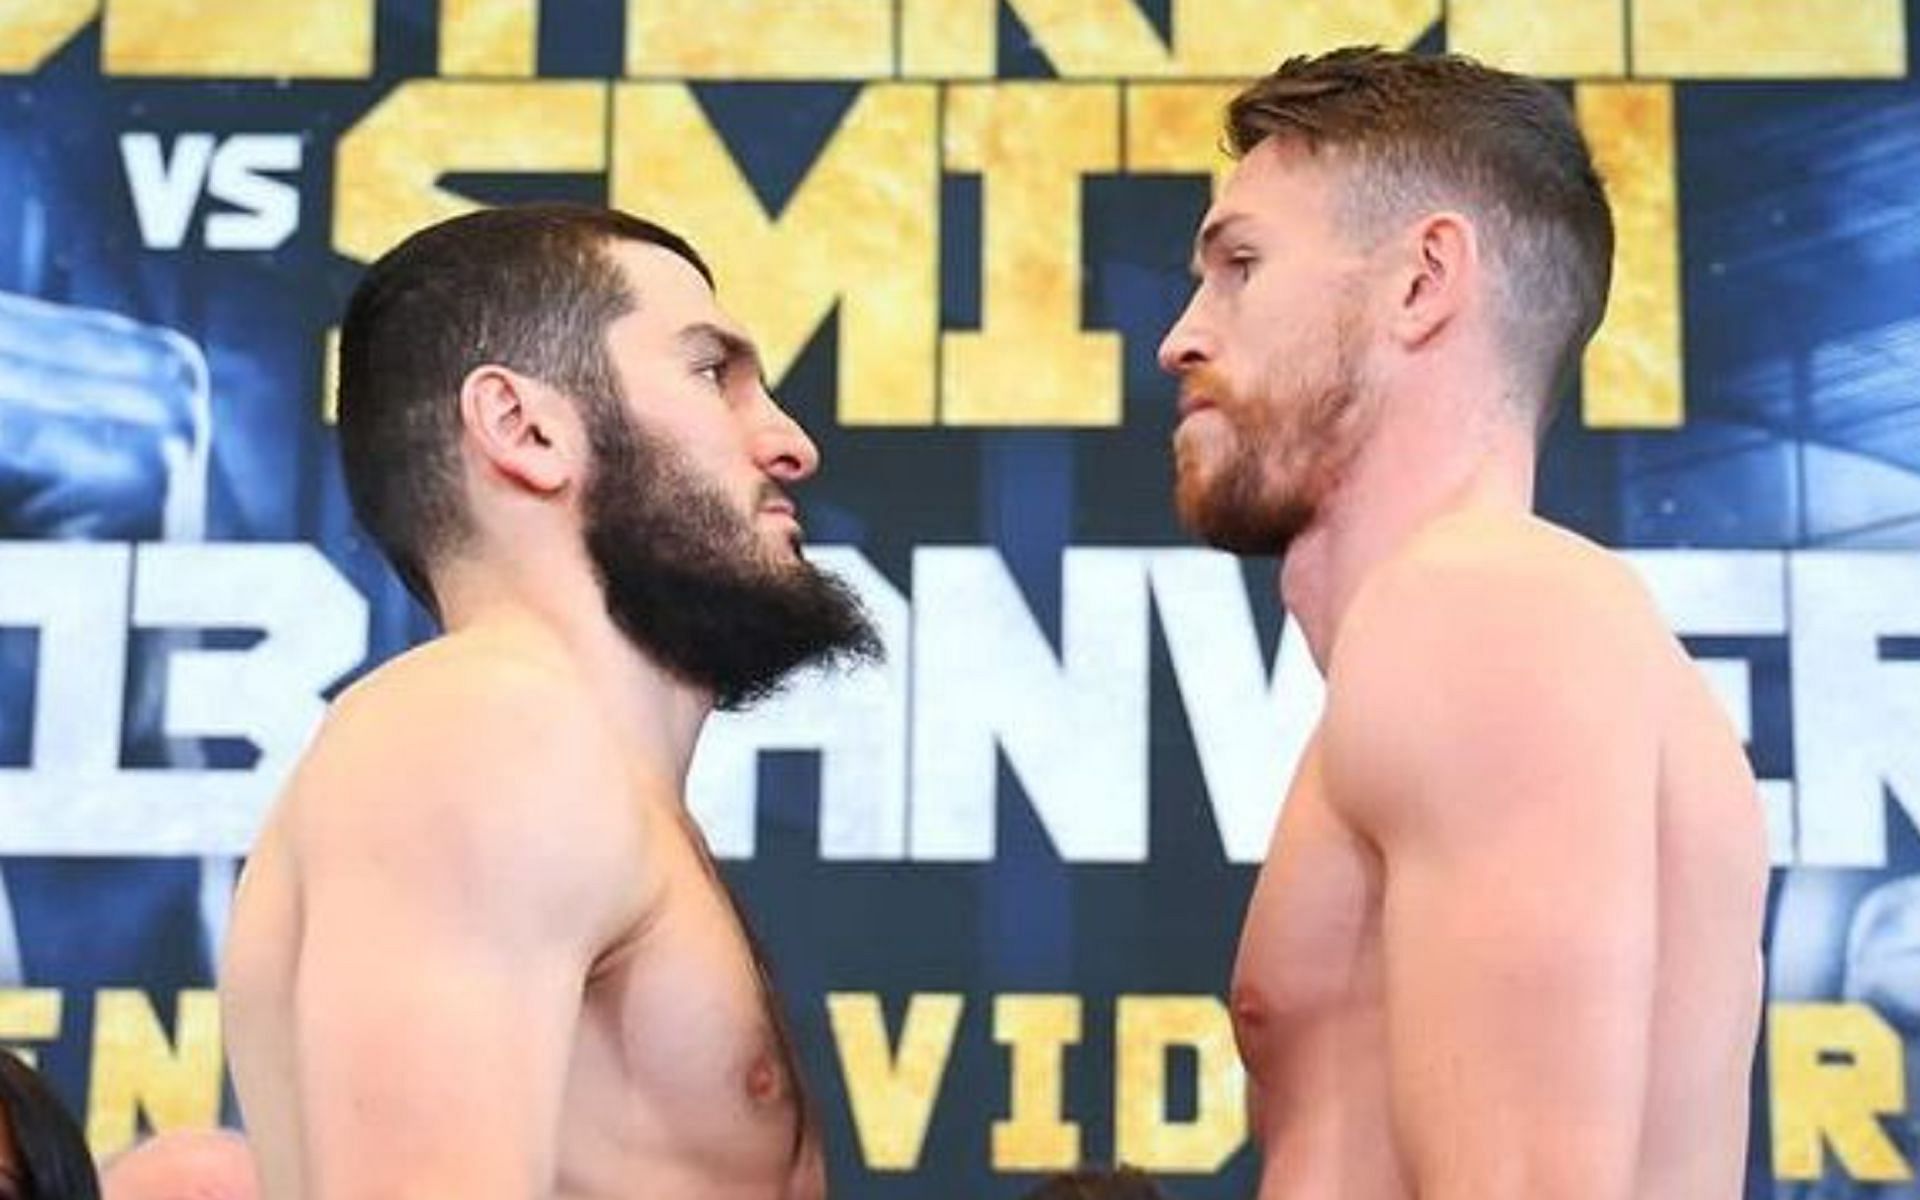 Artur Beterbiev (left) and Callum Smith (right) competed in a highly anticipated title match in the main event (Image Courtesy: @arturbeterbiev Instagram)